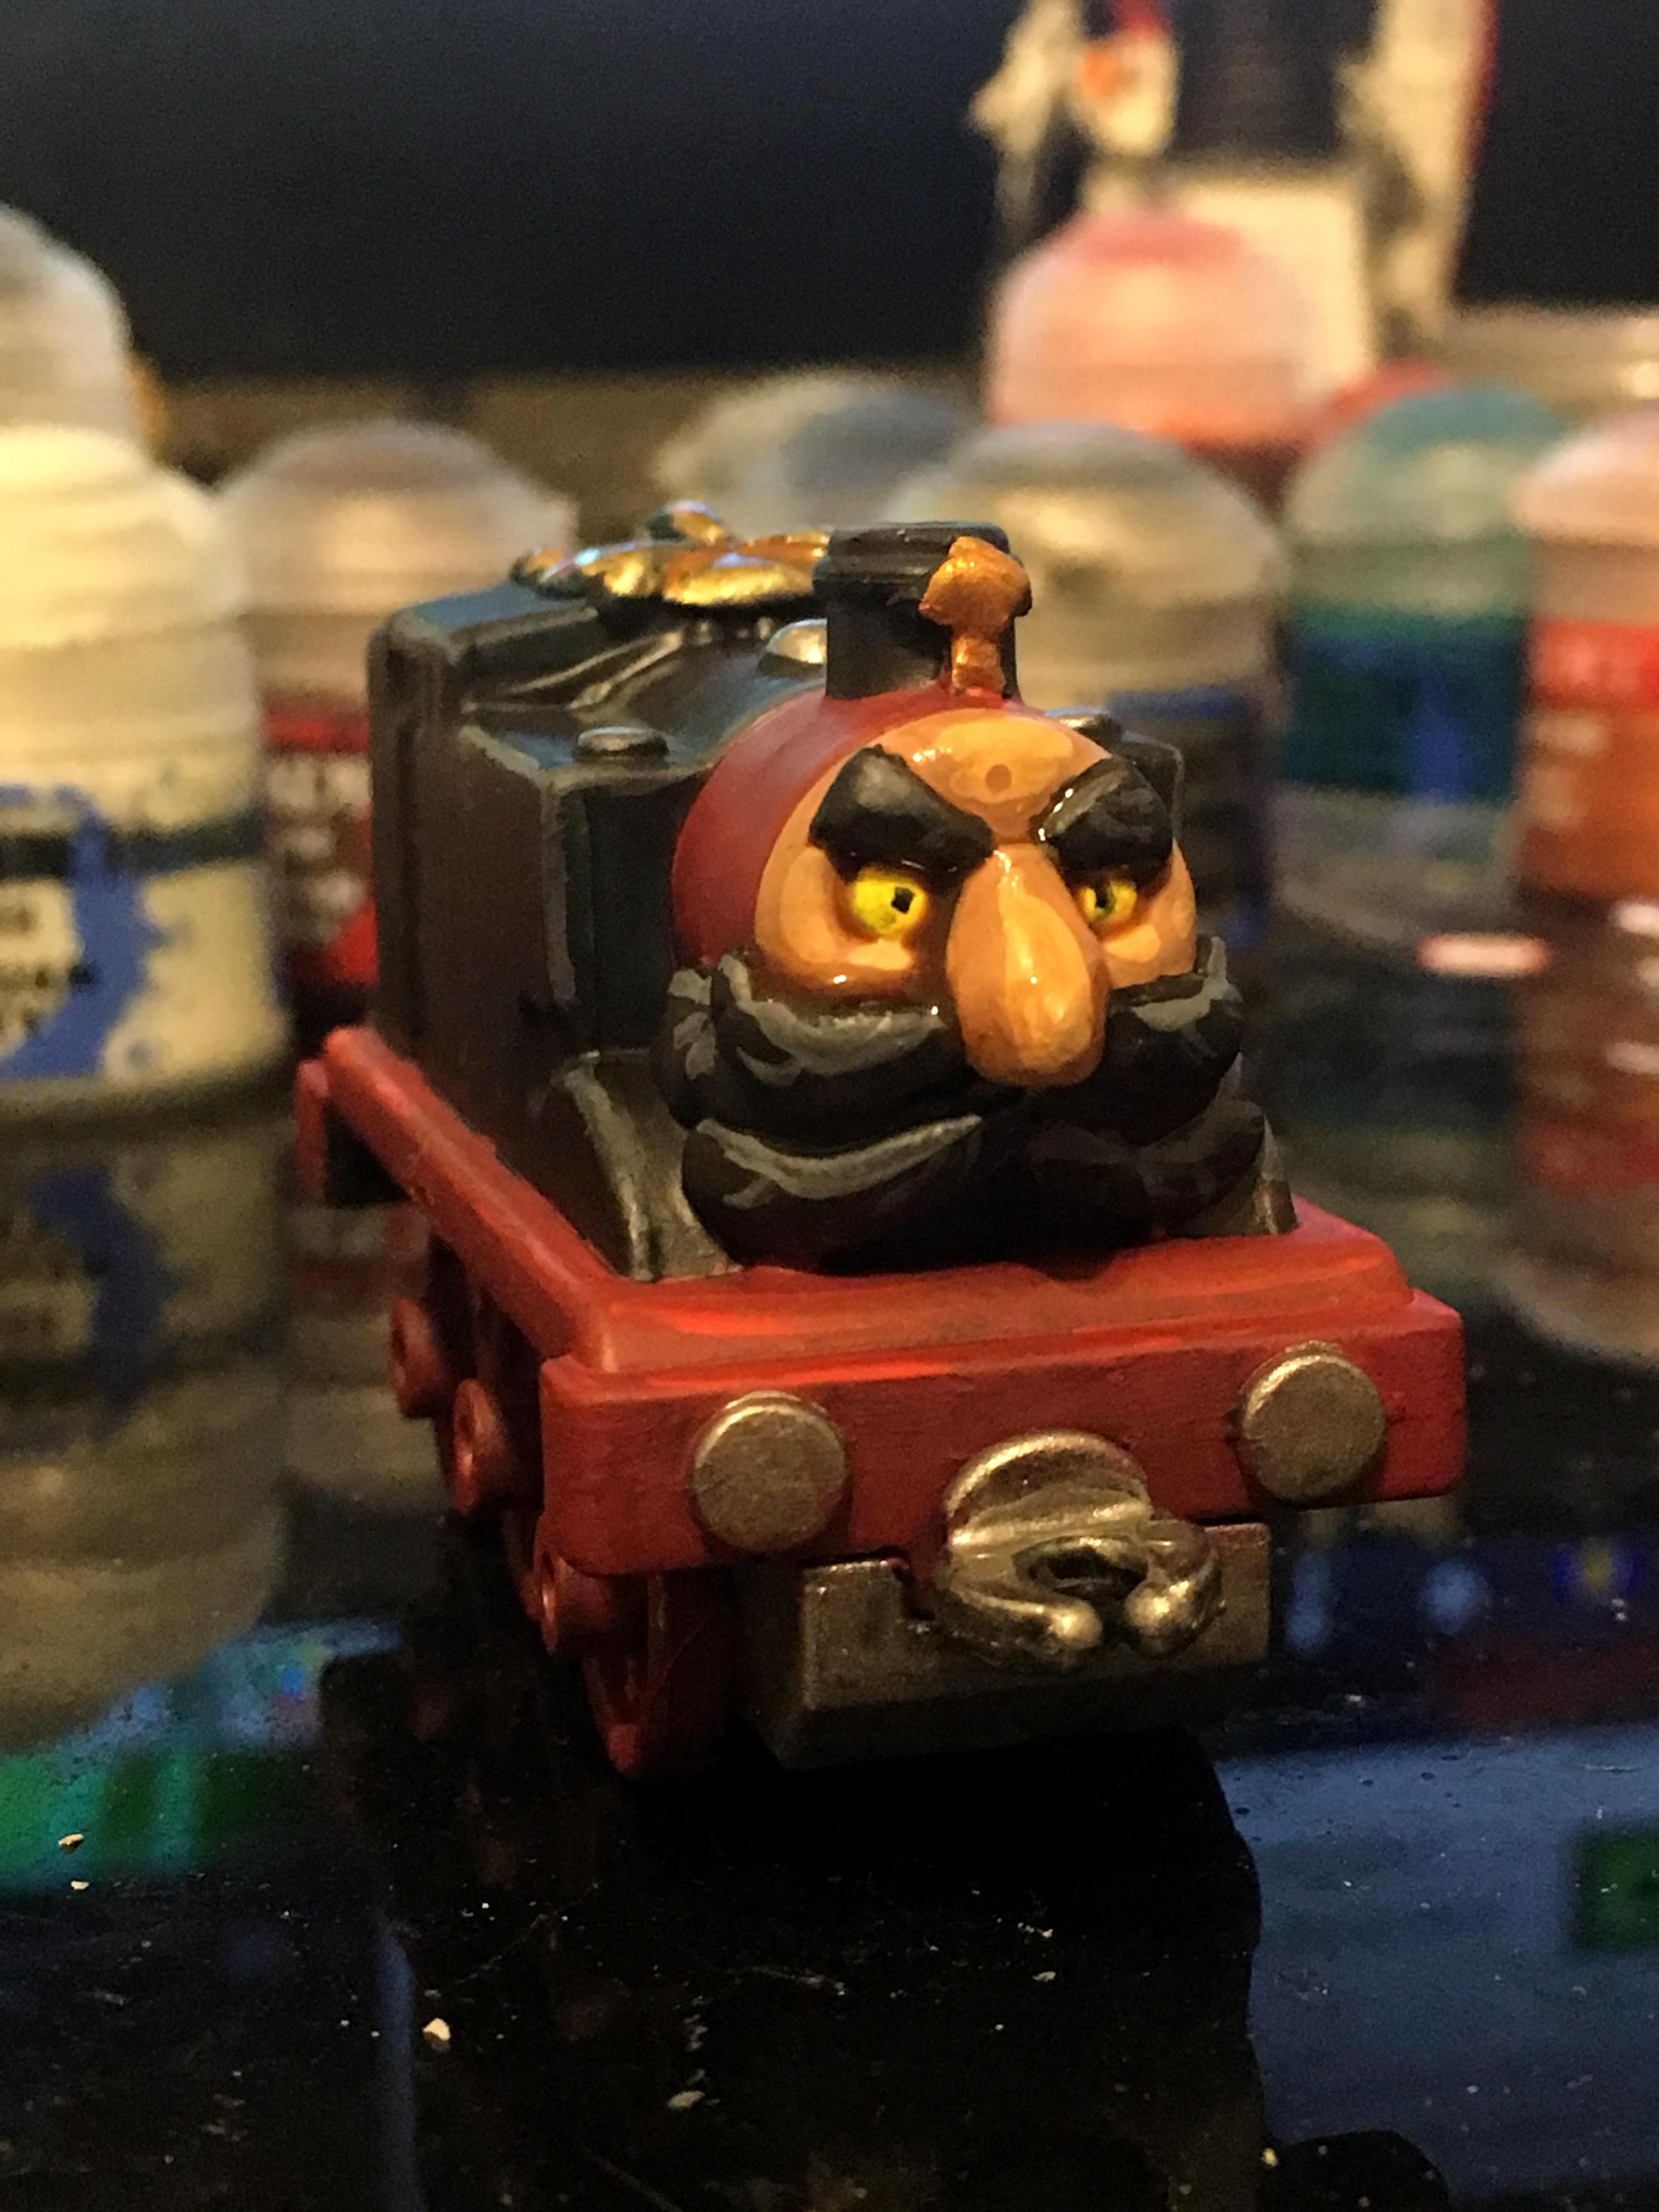 Abyssal, Abyssal Dwarf, Conversion, Dwarves, Grotesque, Tank Engine, Thomas, Train